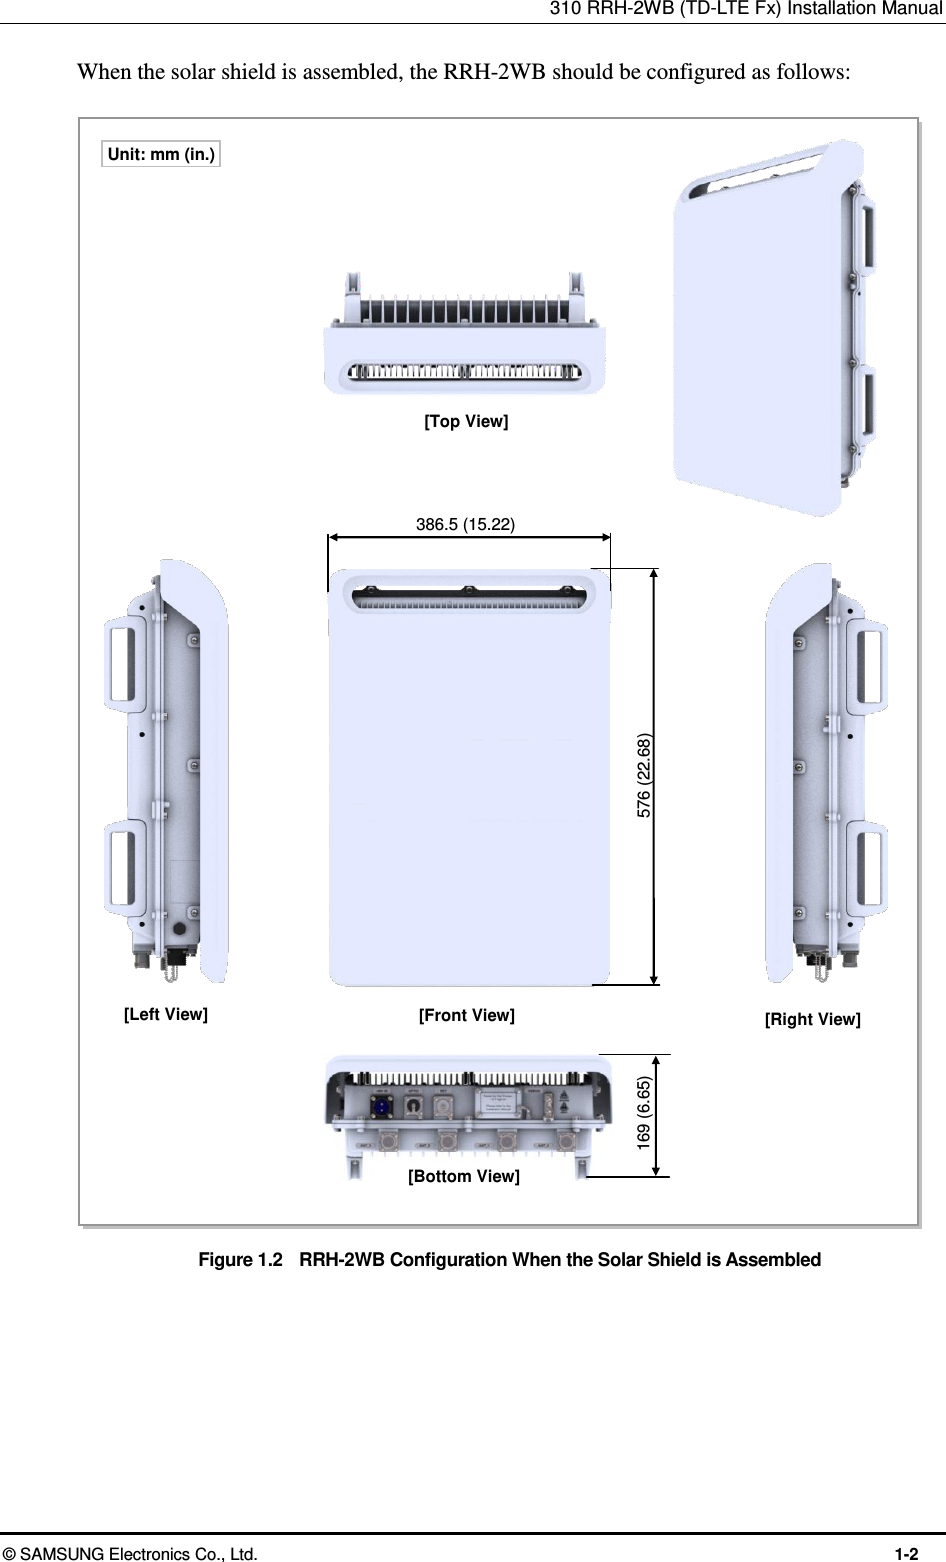 310 RRH-2WB (TD-LTE Fx) Installation Manual  © SAMSUNG Electronics Co., Ltd.  1-2 When the solar shield is assembled, the RRH-2WB should be configured as follows:  Figure 1.2    RRH-2WB Configuration When the Solar Shield is Assembled  [Bottom View] [Front View] [Right View] [Top View] [Left View] 169 (6.65) 386.5 (15.22) 576 (22.68) Unit: mm (in.) 